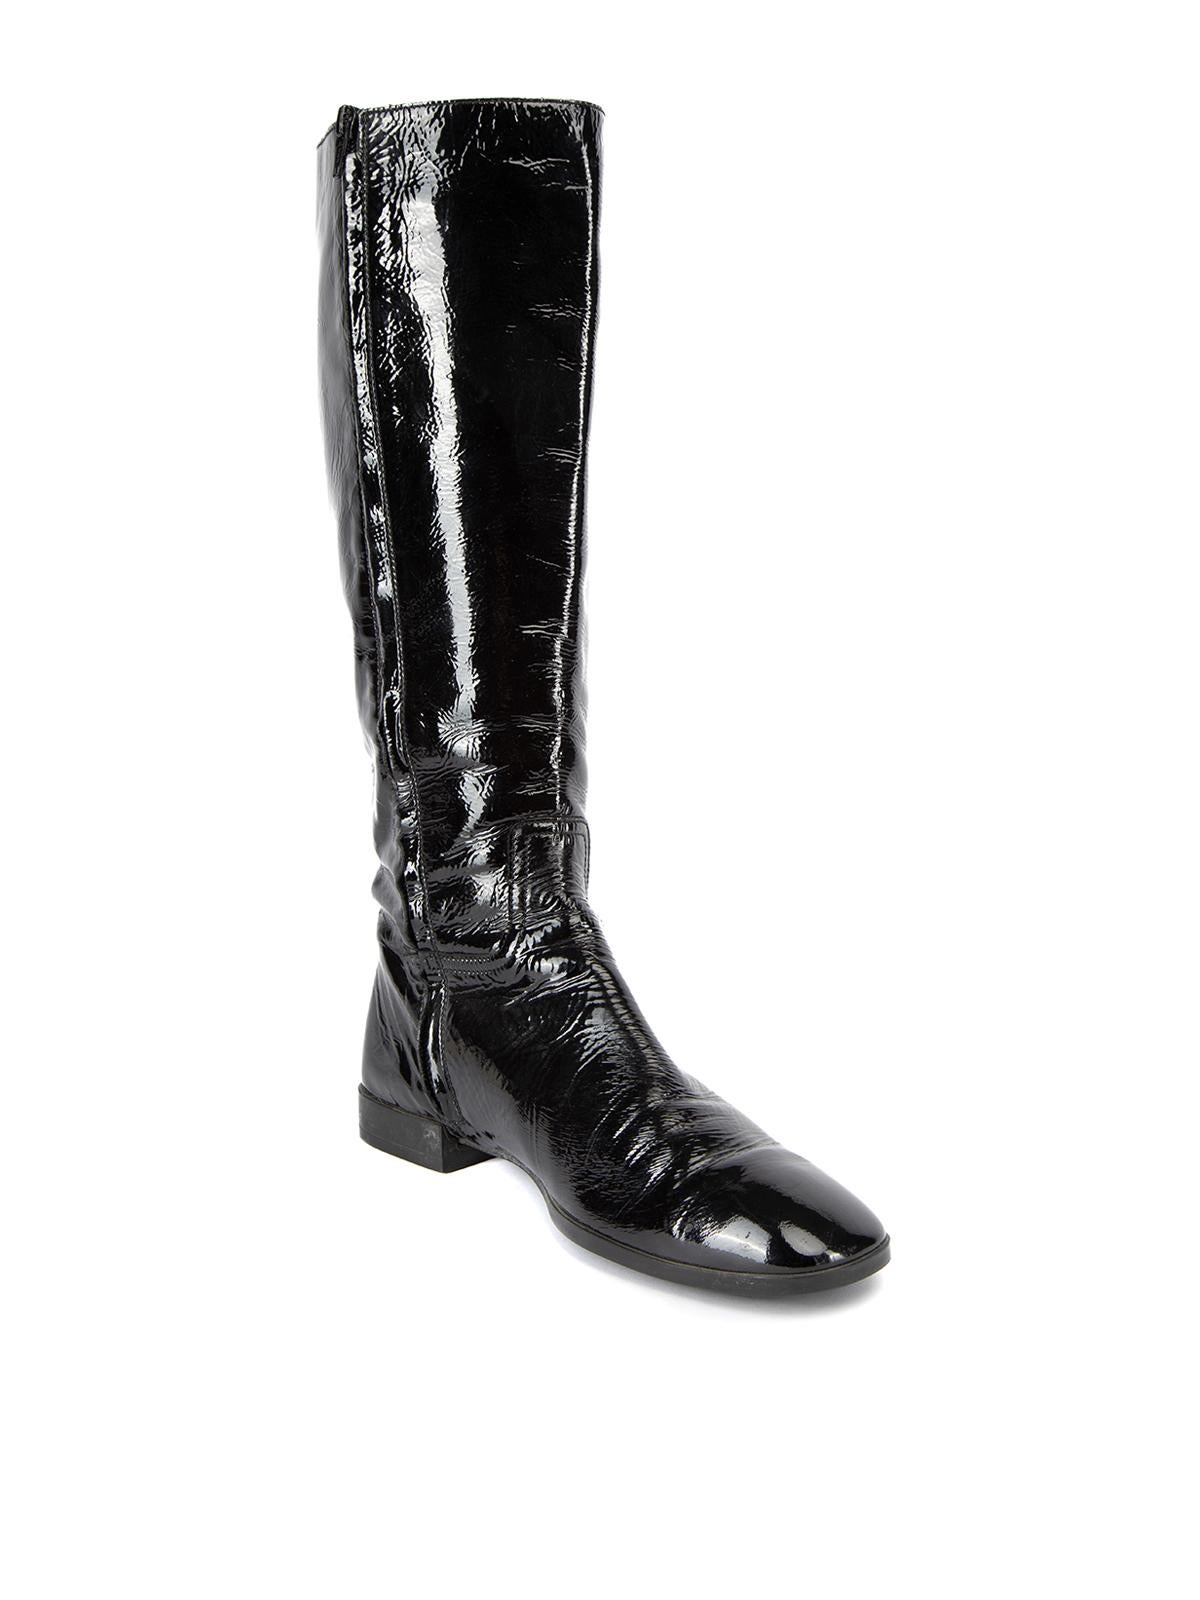 CONDITION is Very good. Hardly any visible wear to shoes is evident. Some creasing can be seen to patent leather exterior and there is vey light wear to the soles on this used Hogan designer resale item. Details Black Patent leather Knee high boots